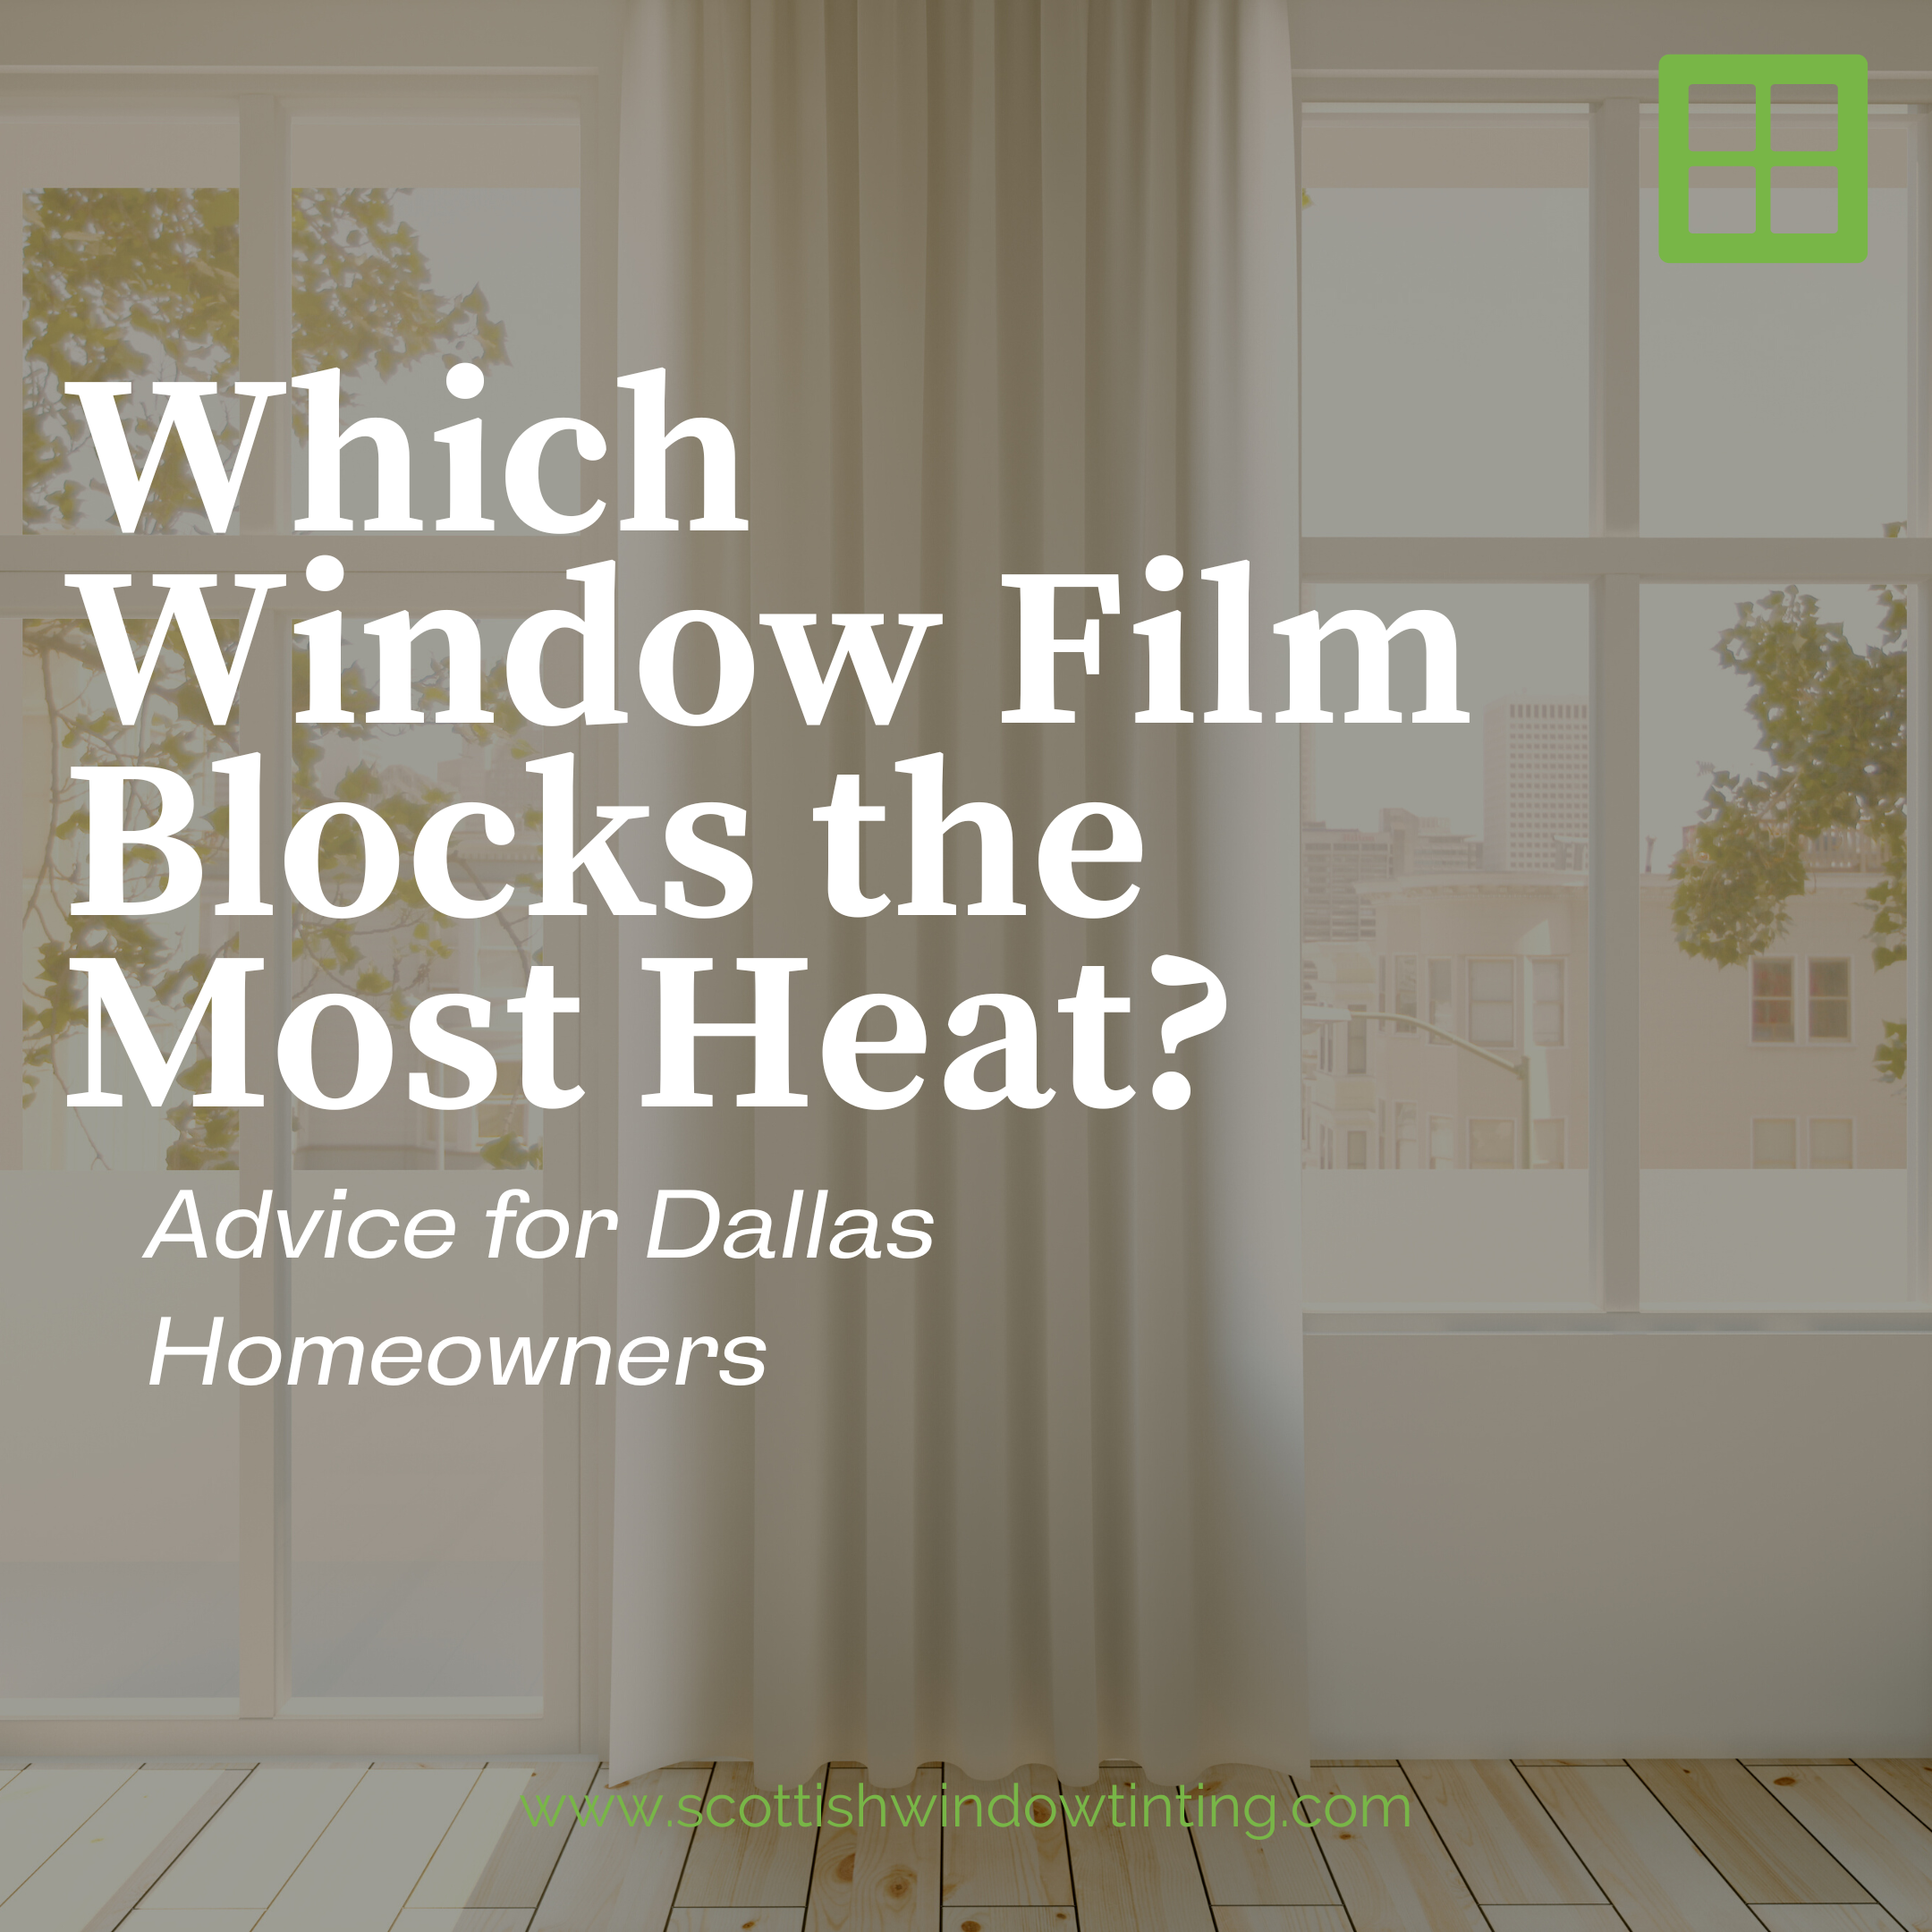 Which Window Film Blocks the Most Heat? Advice for Dallas Homeowners